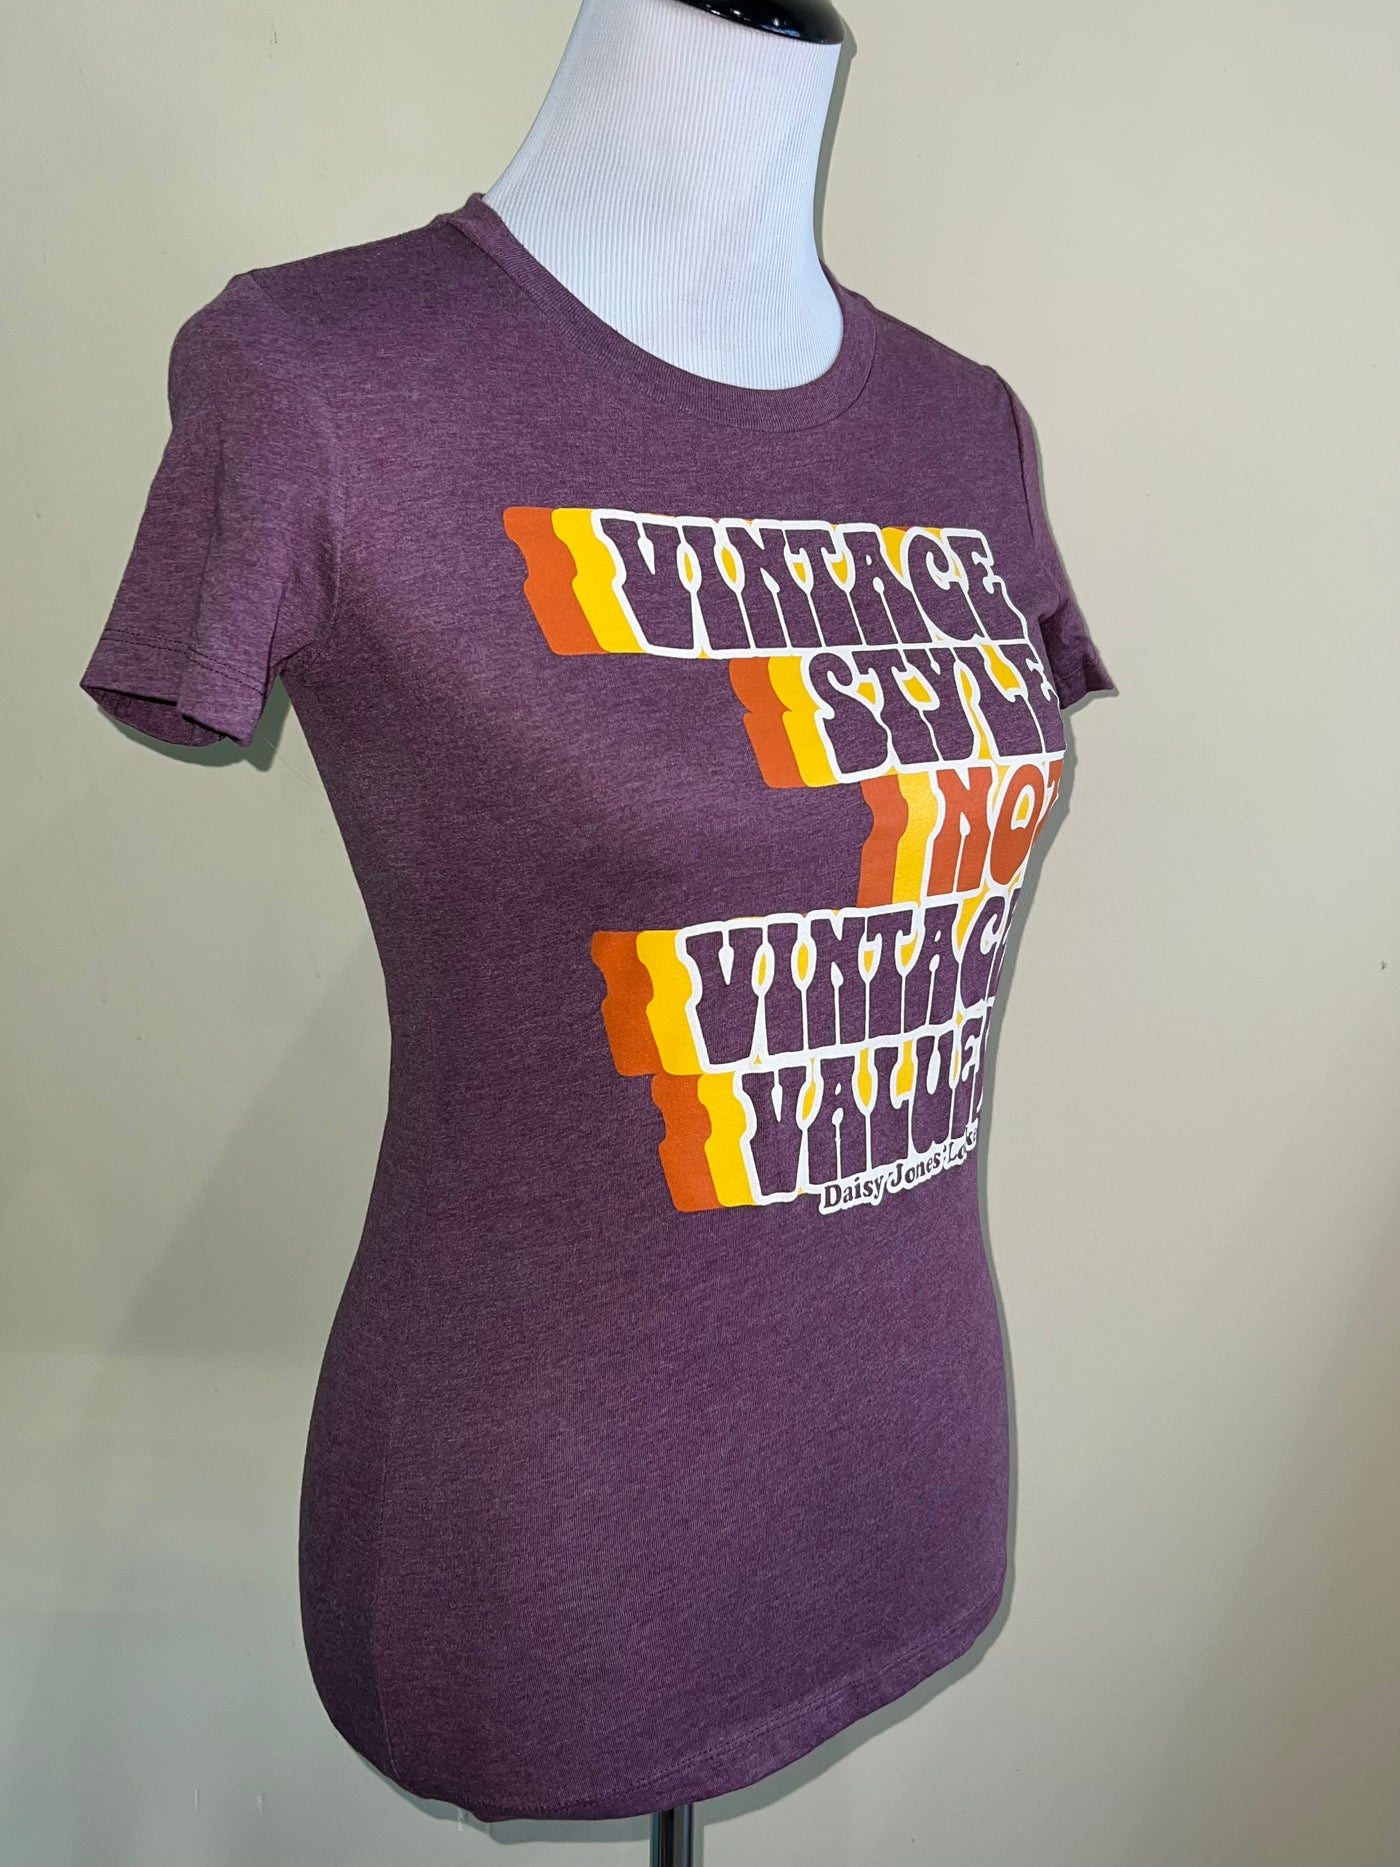 Vintage Style NOT Vintage Values Tee in Maroon *Limited Edition*